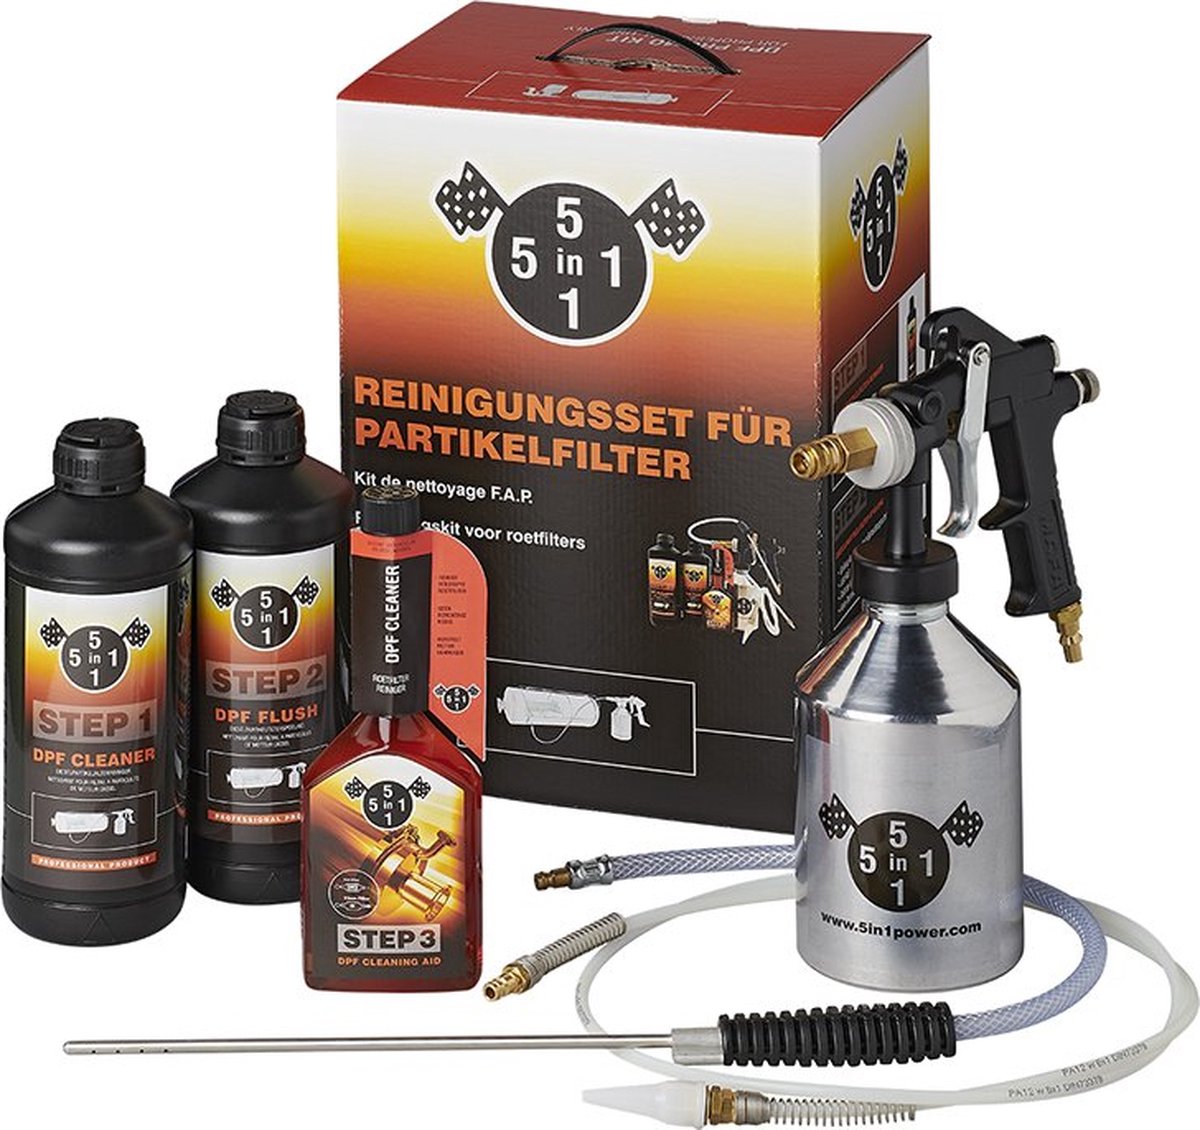 5 in 1 DPF Cleaning Kit.